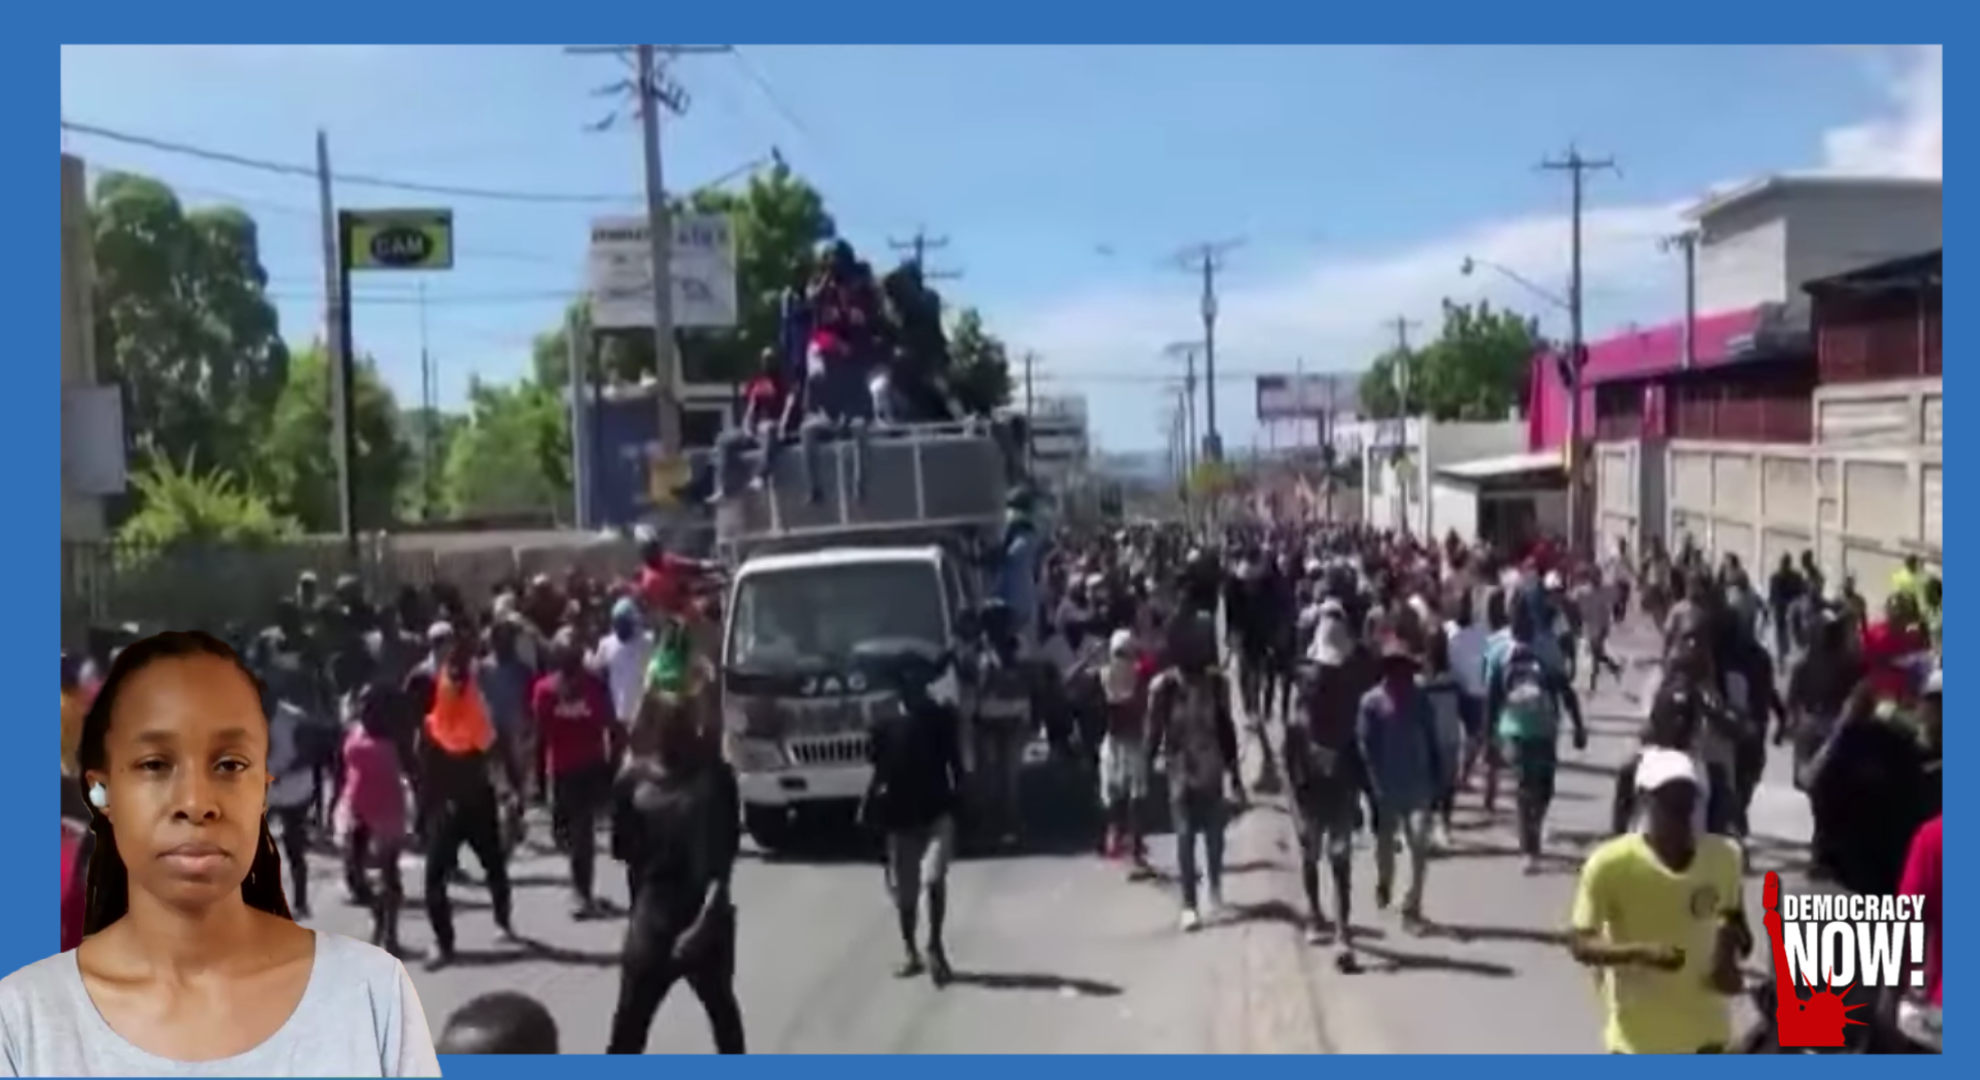 Haiti Update: Gangs Rule Much of Capital Amid Protests over Fuel Costs, Calls for PM to Resign